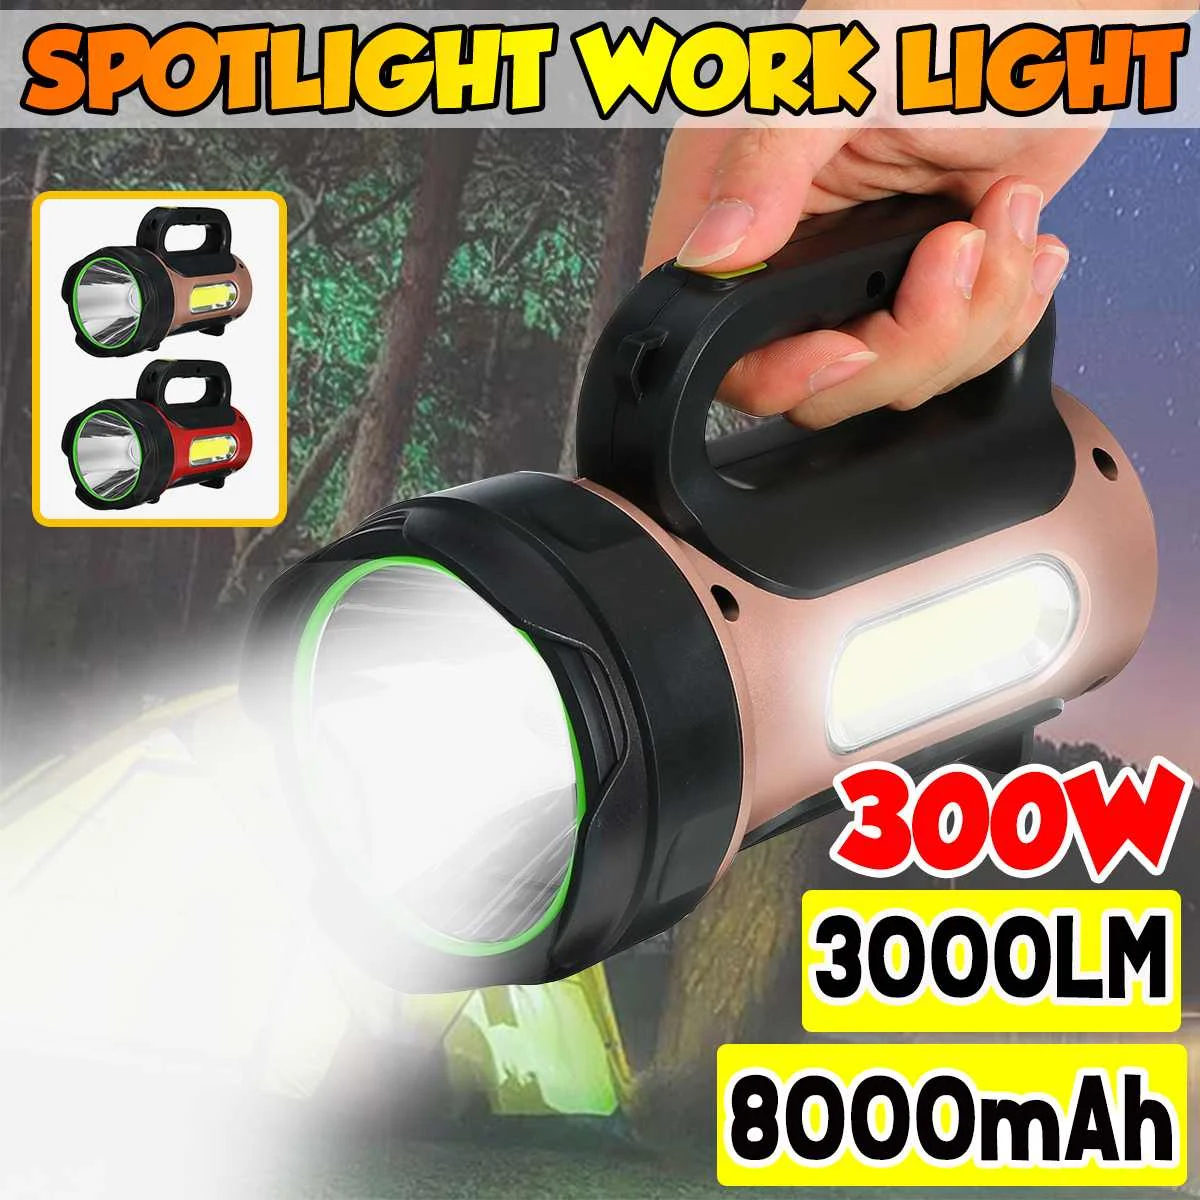 

3000lm Powerful LED flashlight lanterna portable searchlight rechargeable spotlight 1000m range hunting lamp with side light